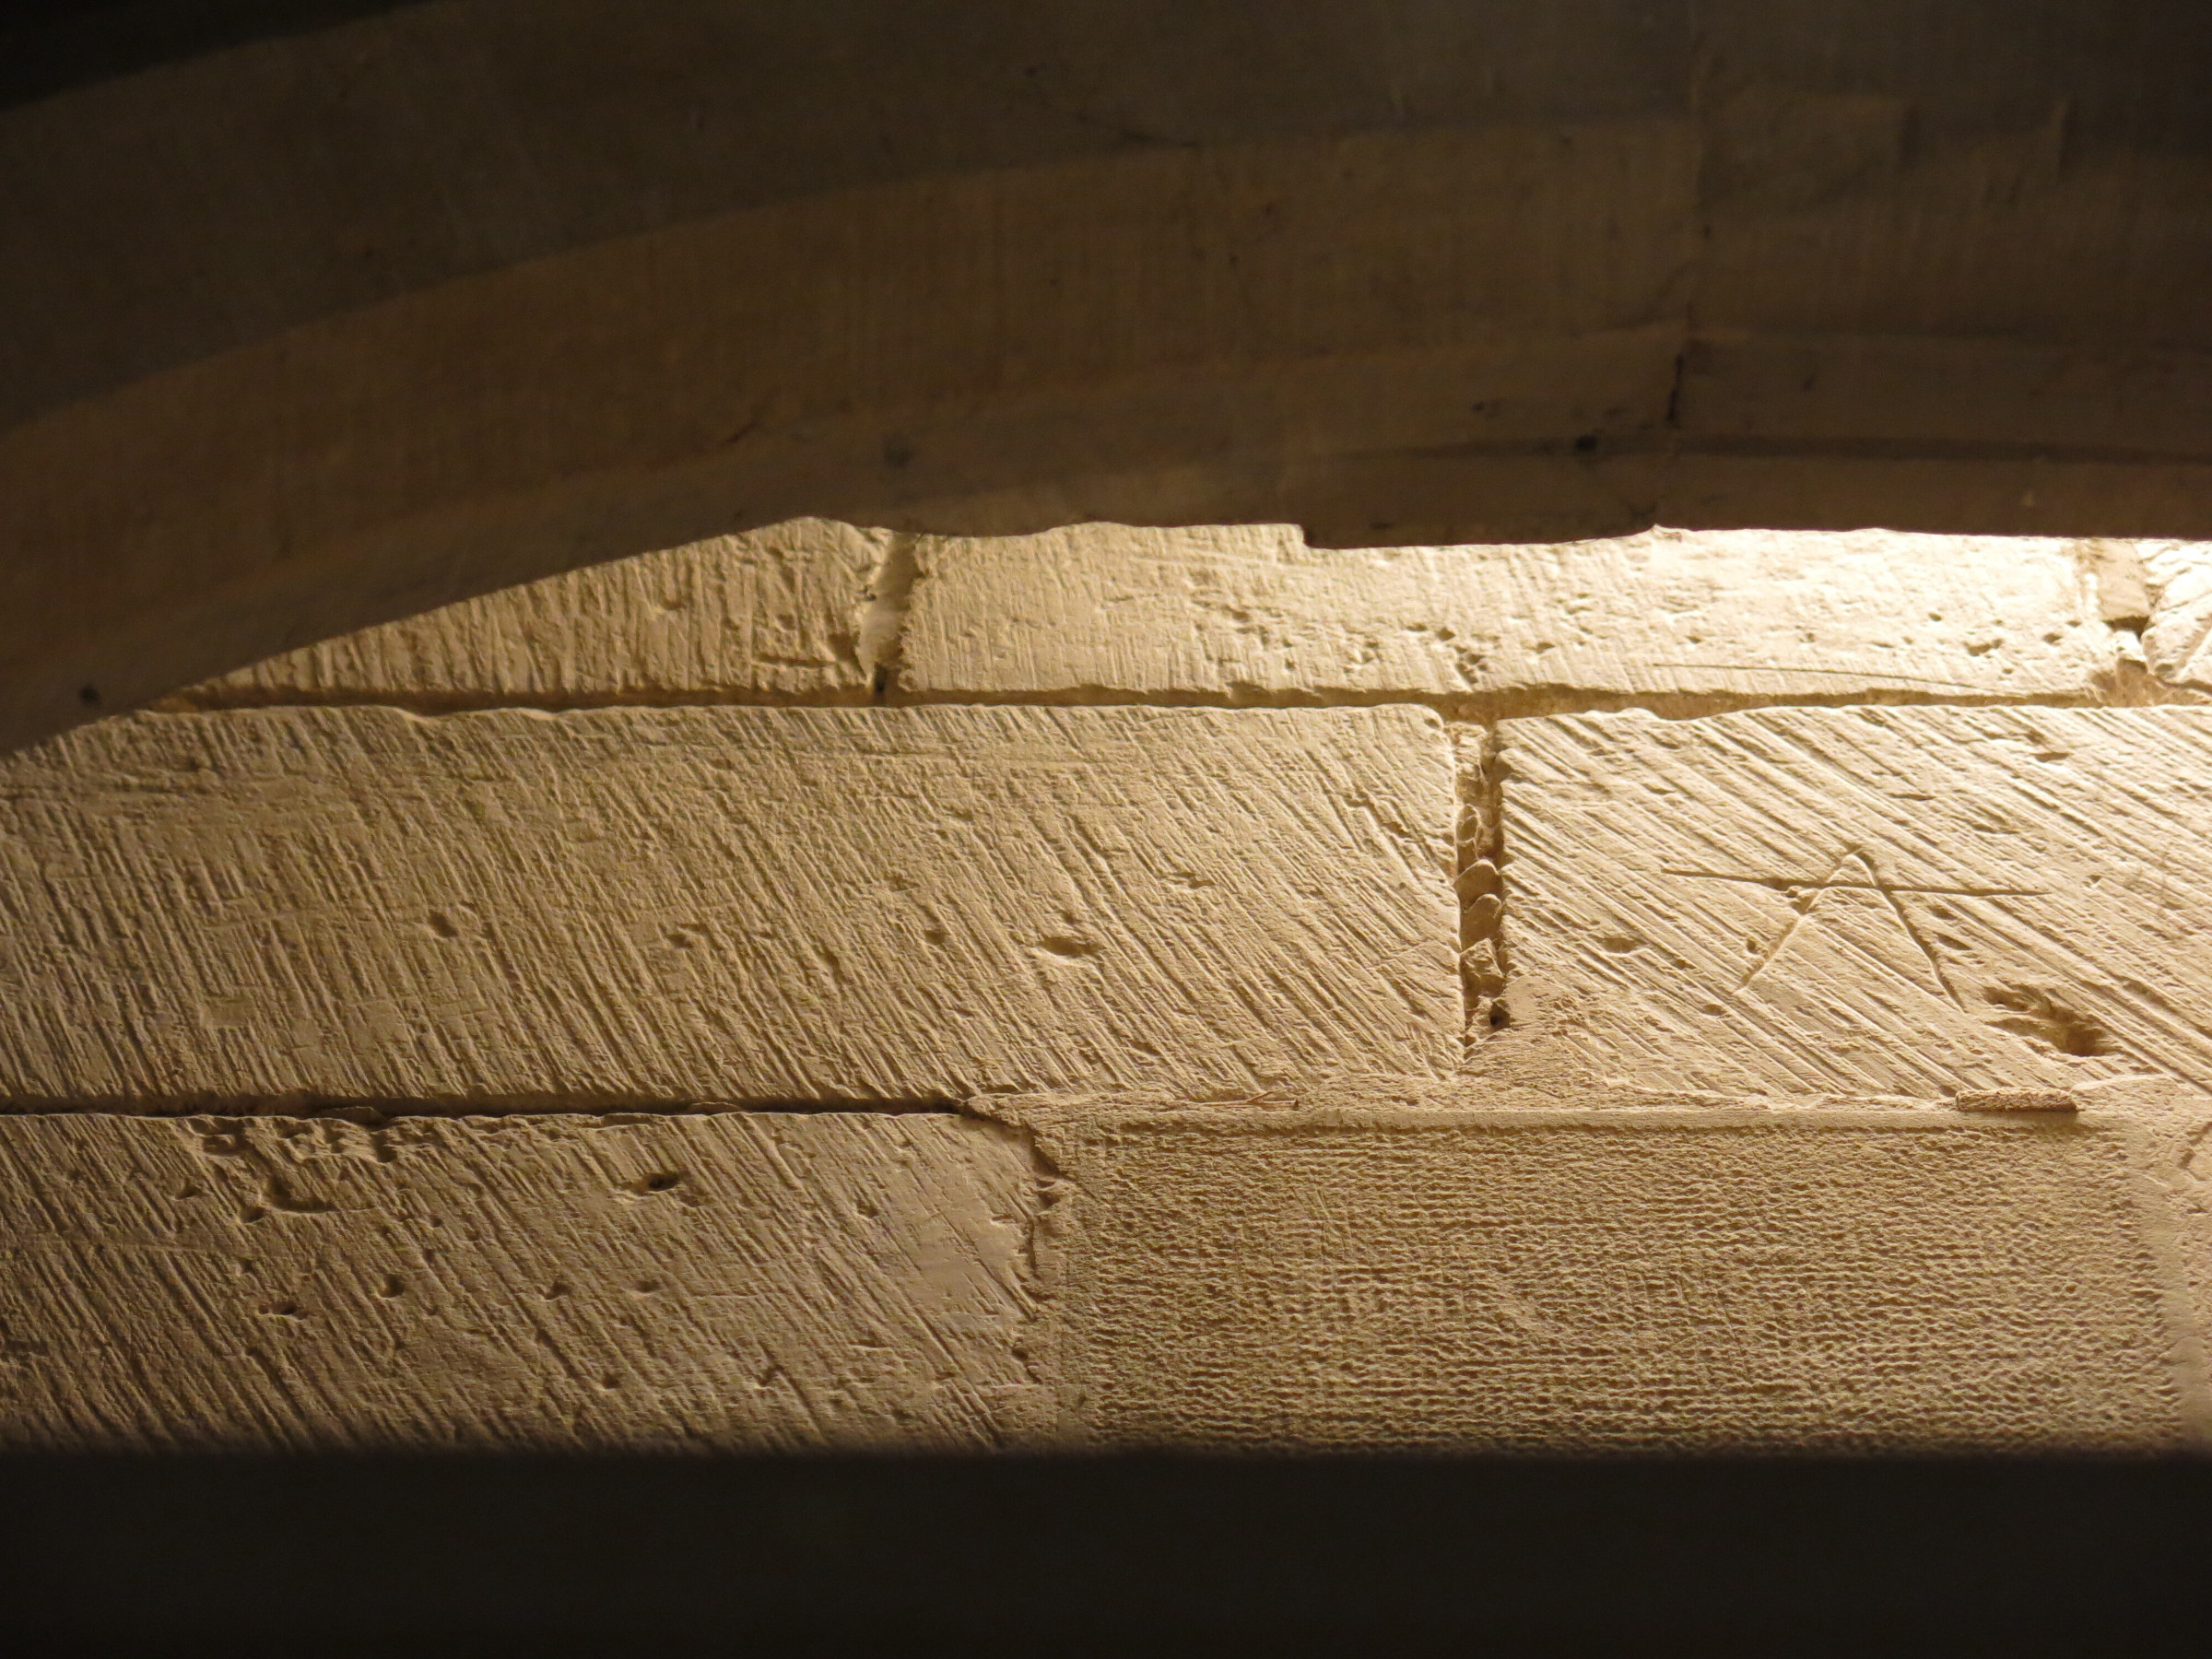 Parallel chisel marks and a stonemason mark shaped as a crossed-out inverted V, possibly an A or a compass, on the wall of the church.